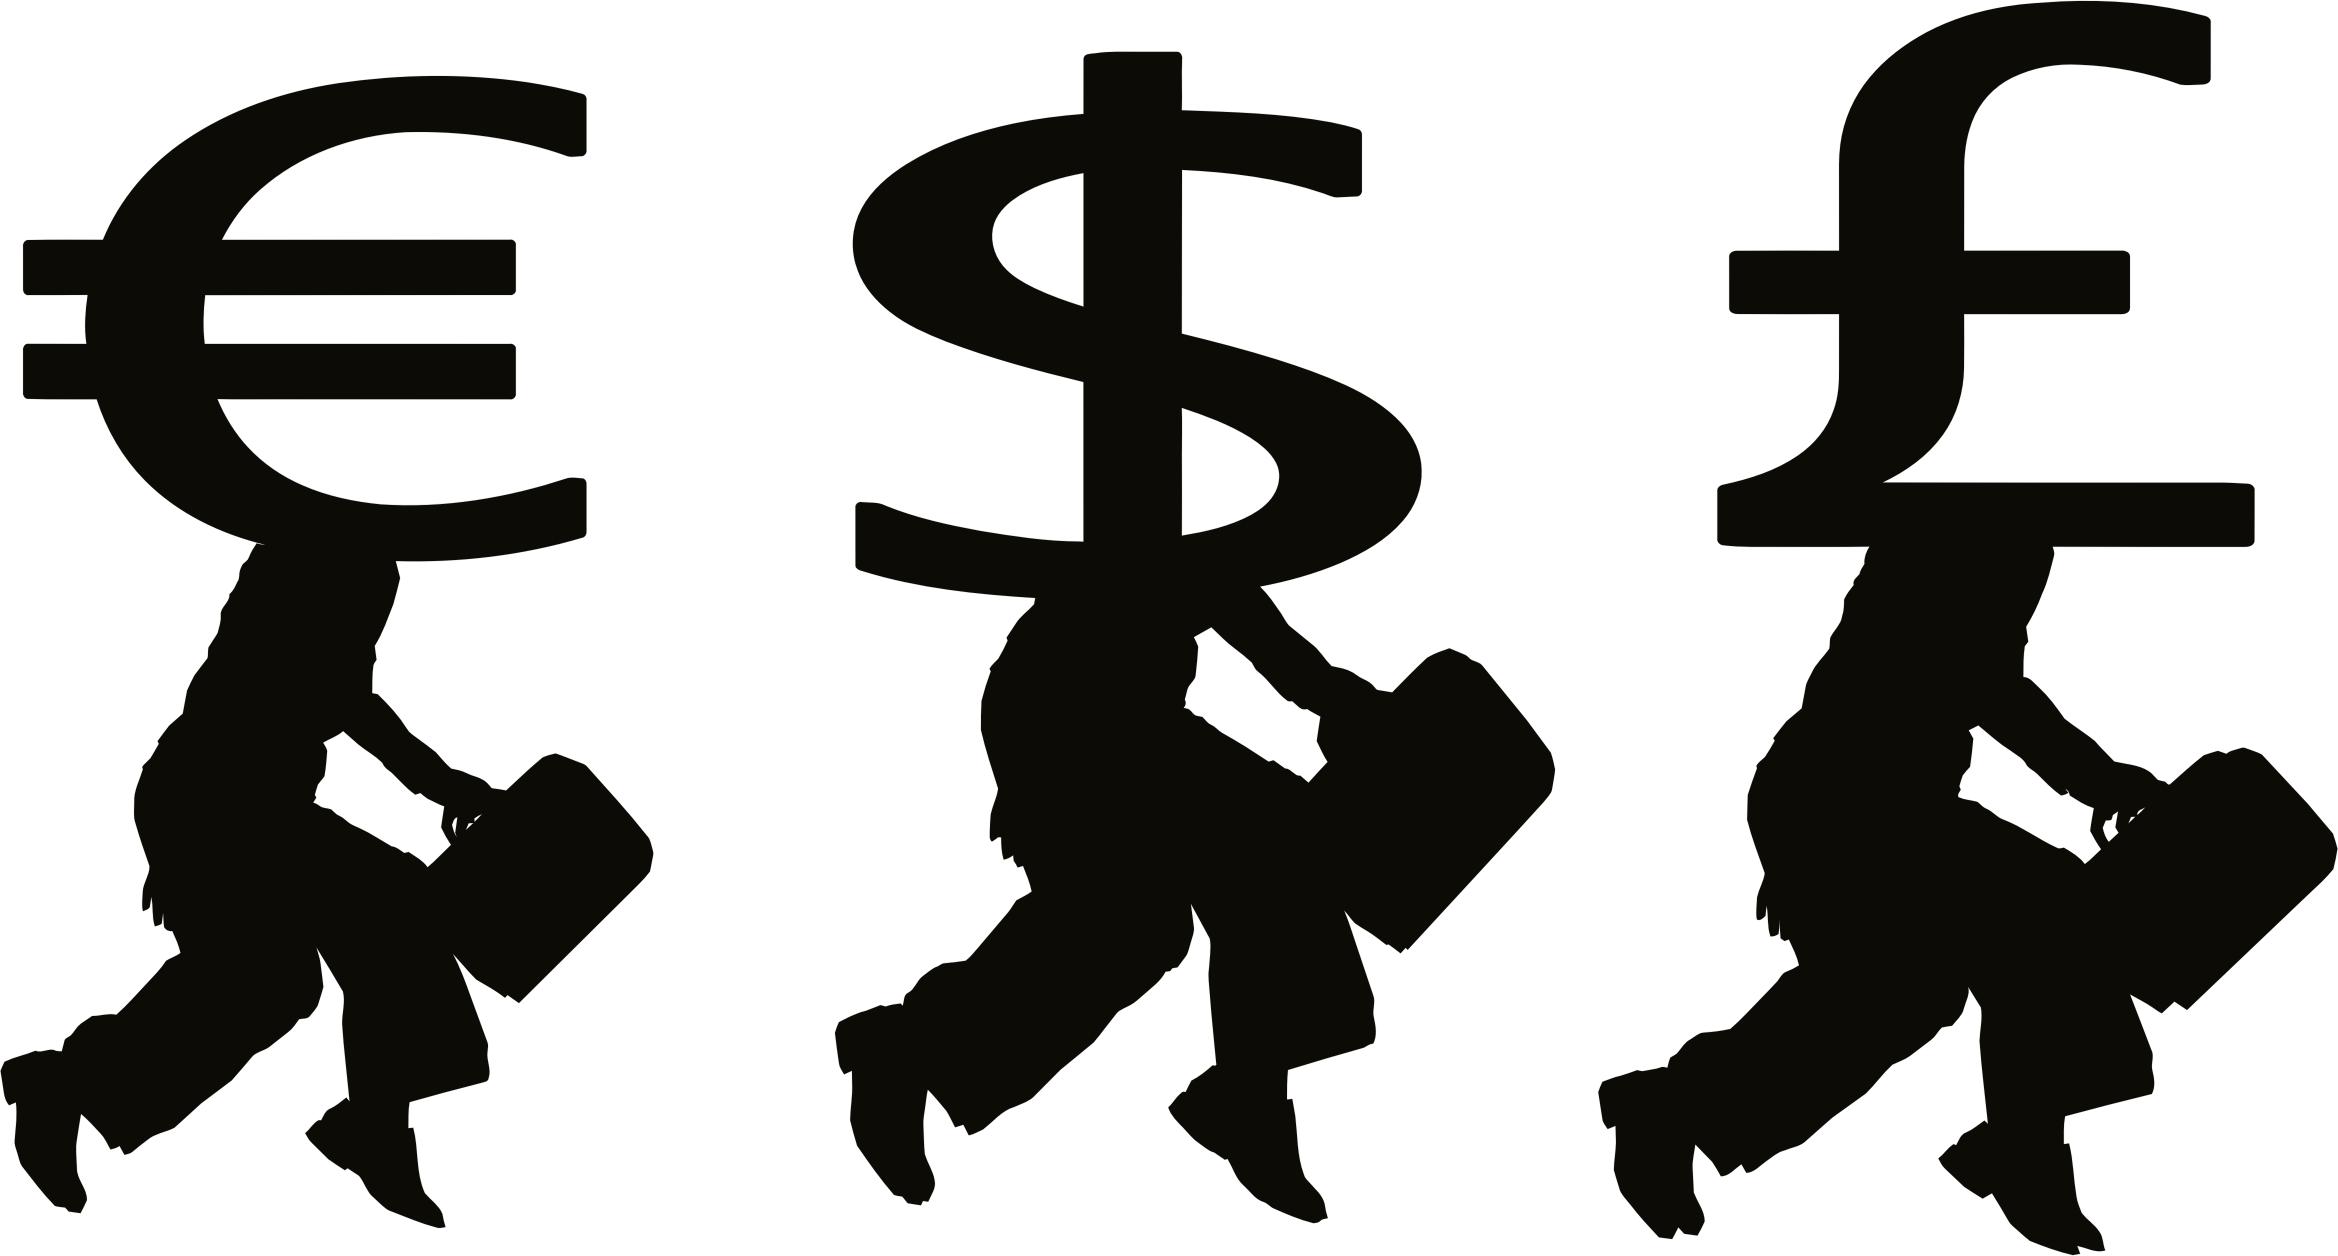 Money People Silhouette icons